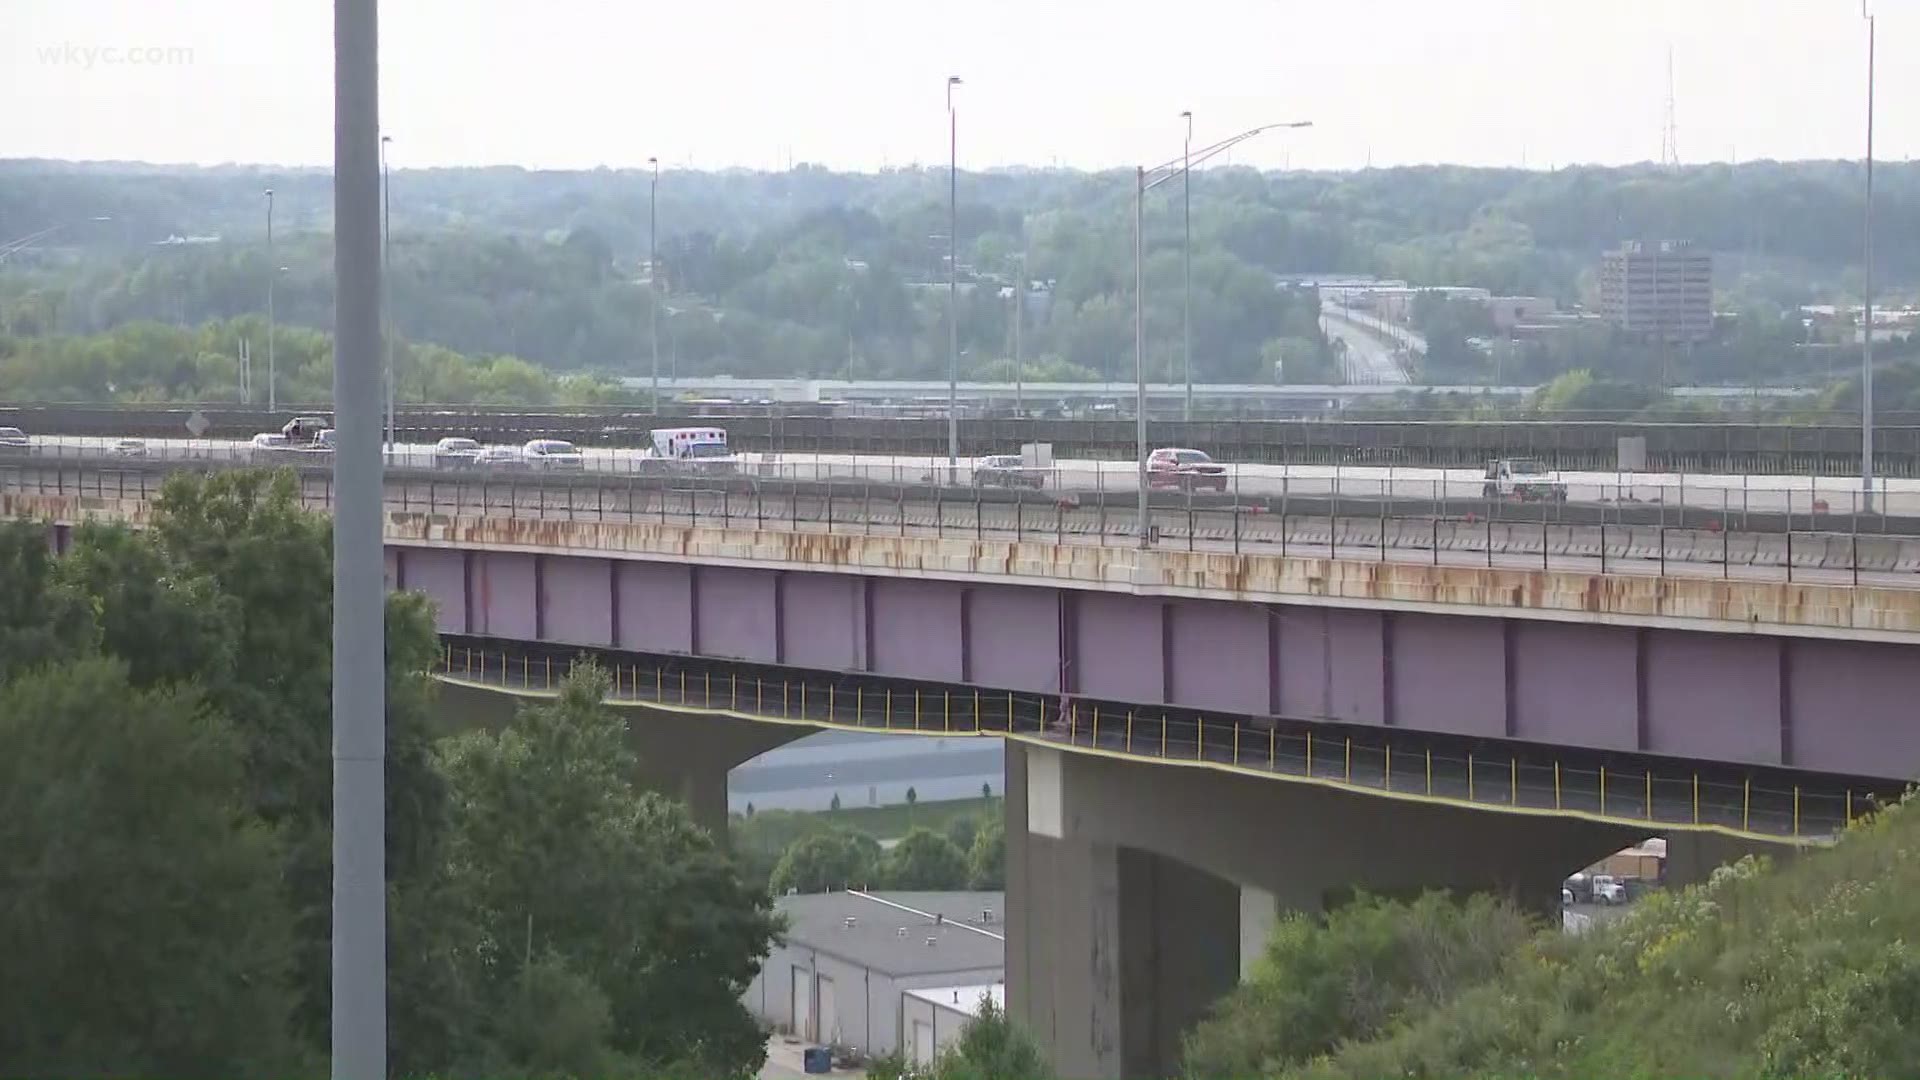 All eastbound traffic has been moved to the new bridge, creating some changes for drivers. Andrew Horansky reports.